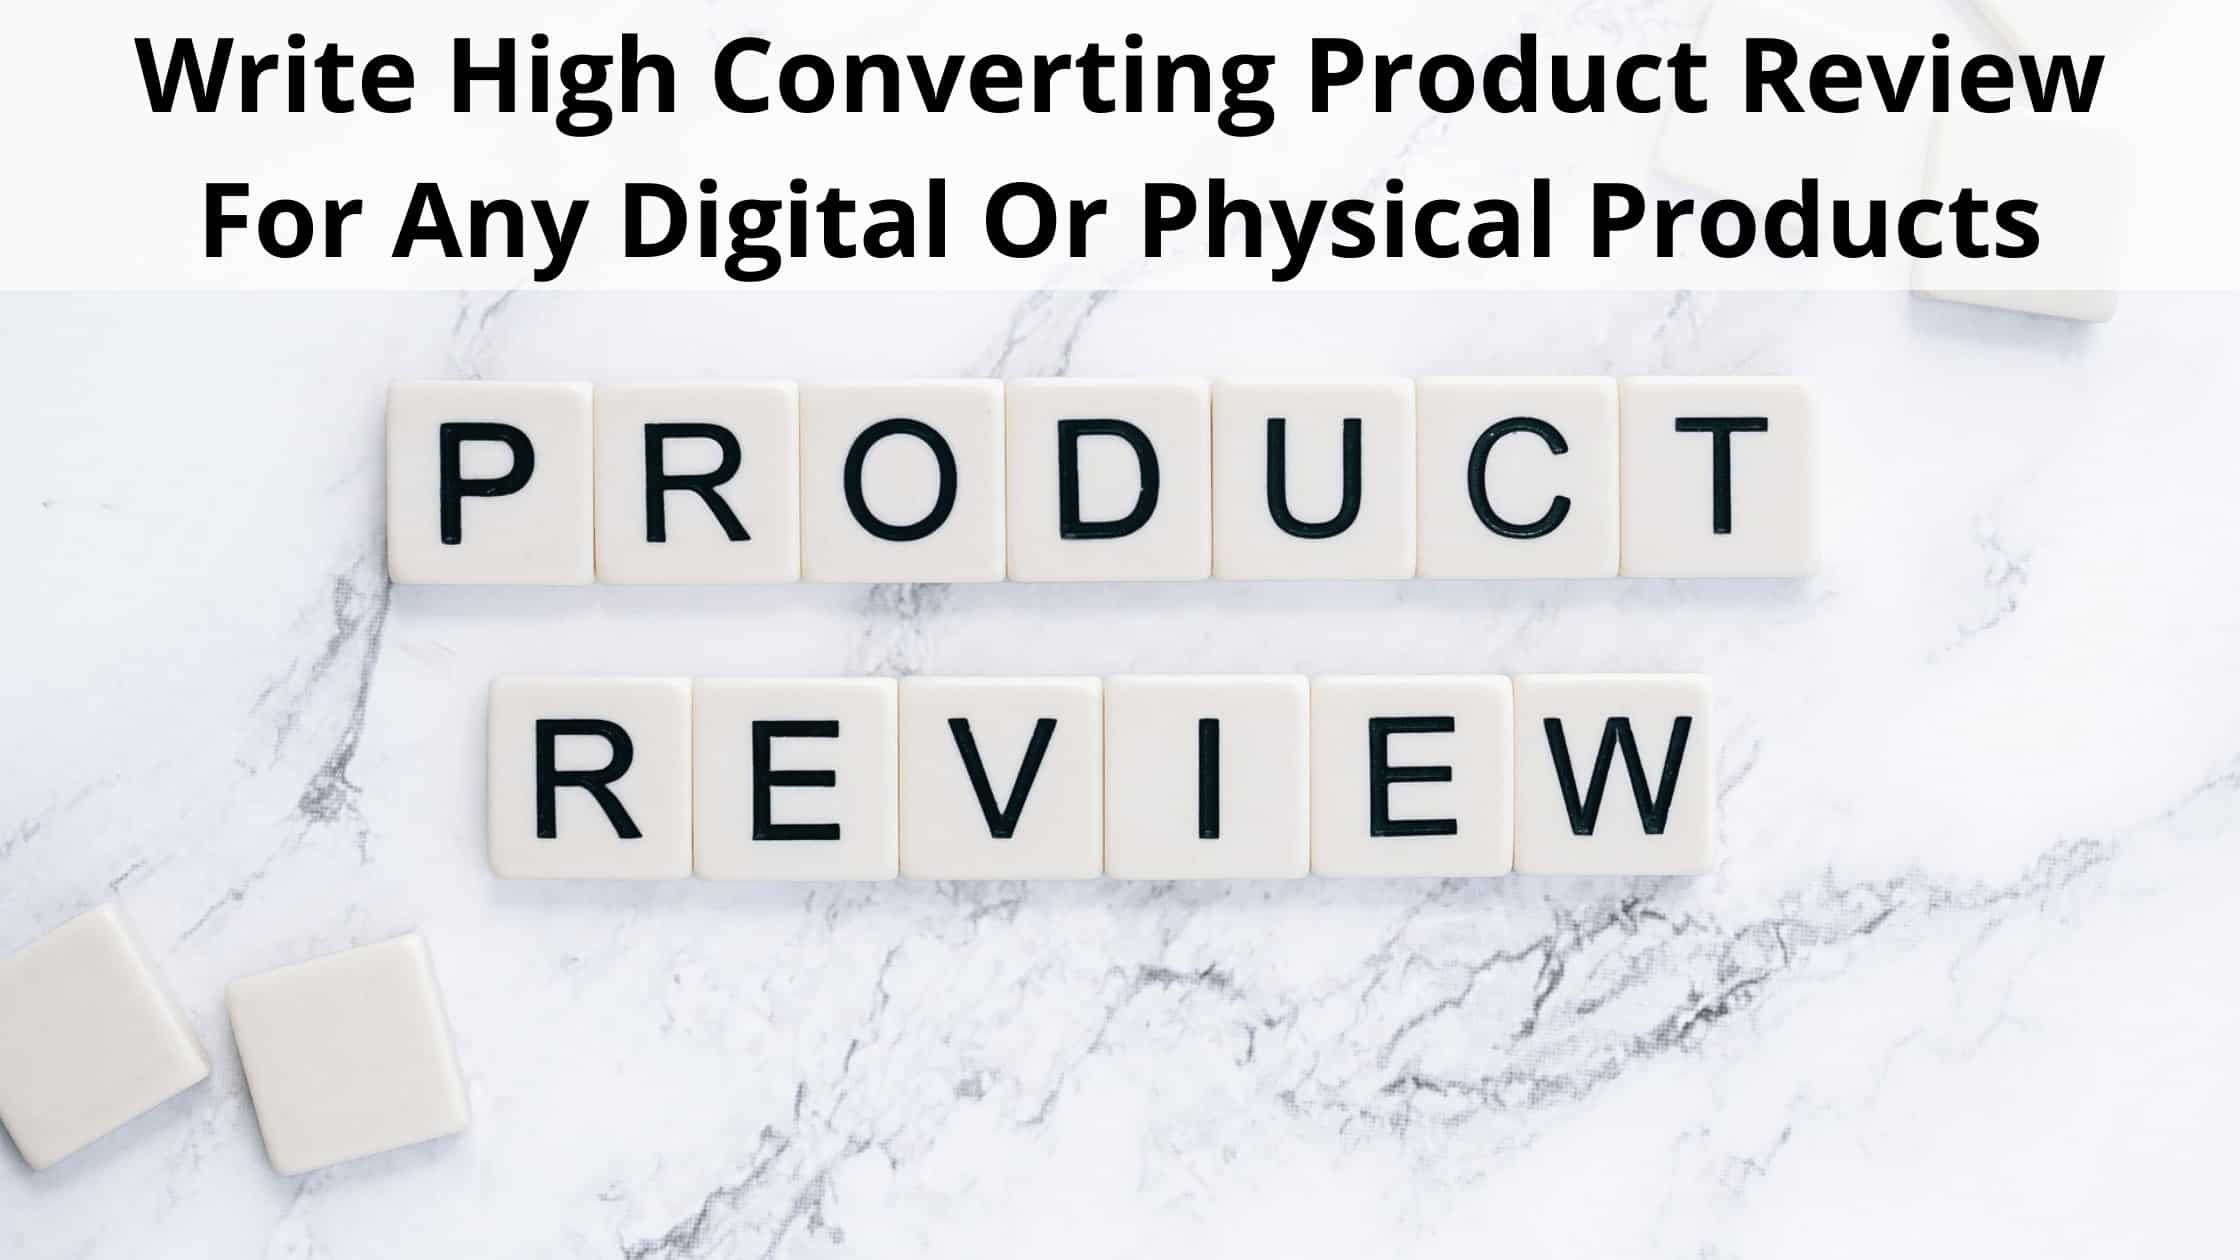 How to write a high converting product review